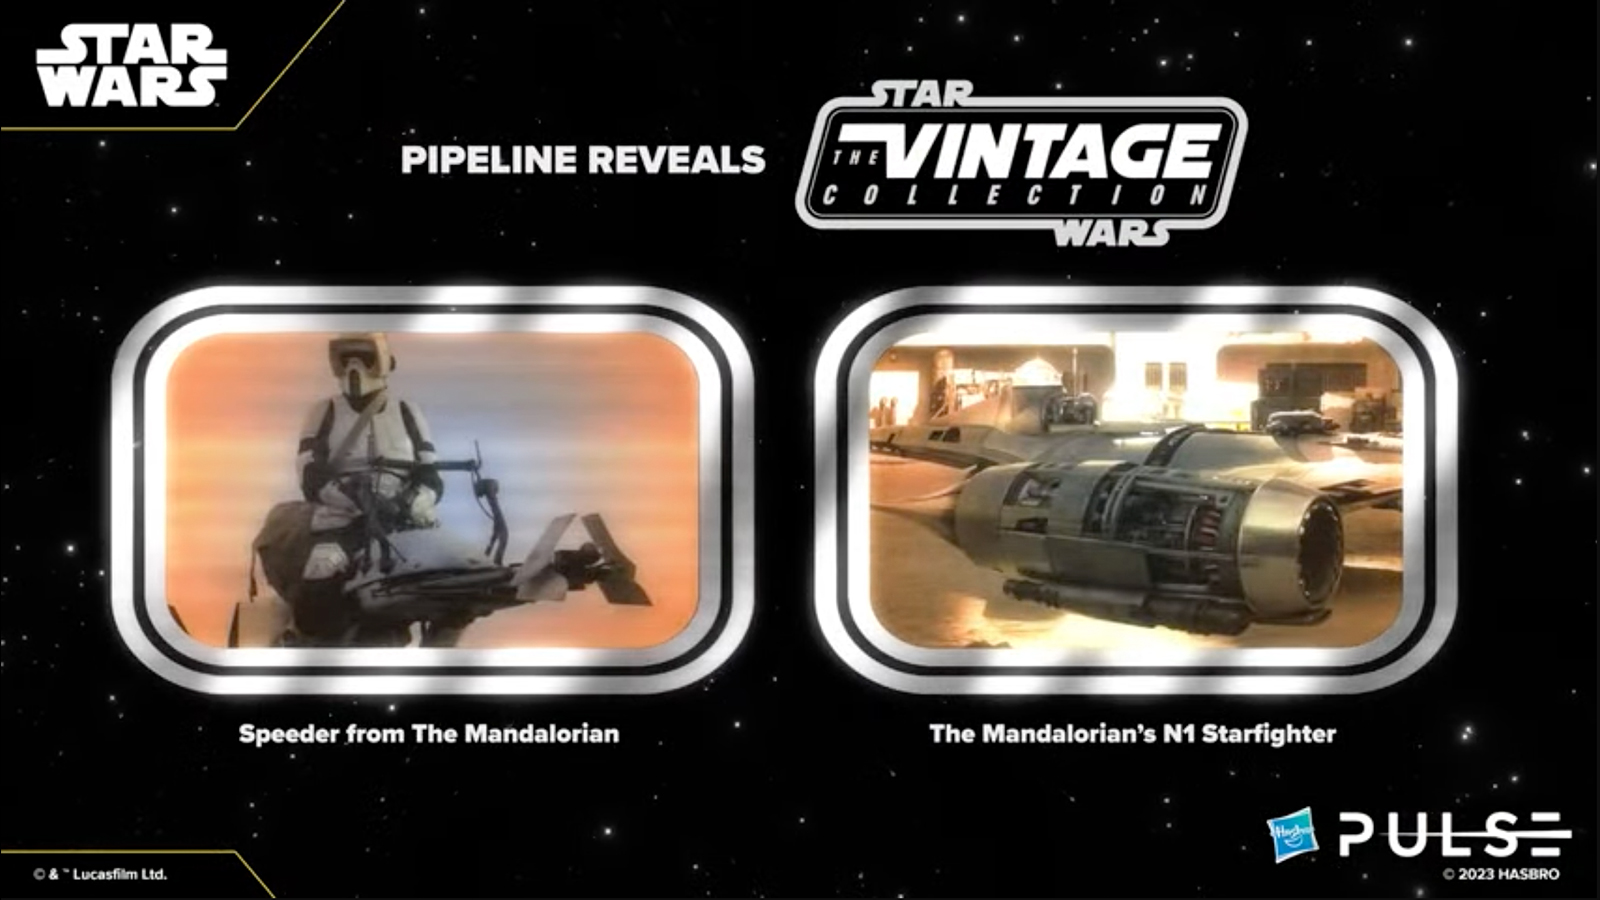 New 2/1/23 Pipeline Reveals - The Black Series, The Vintage Collection, And Retro Collection Toy Lines